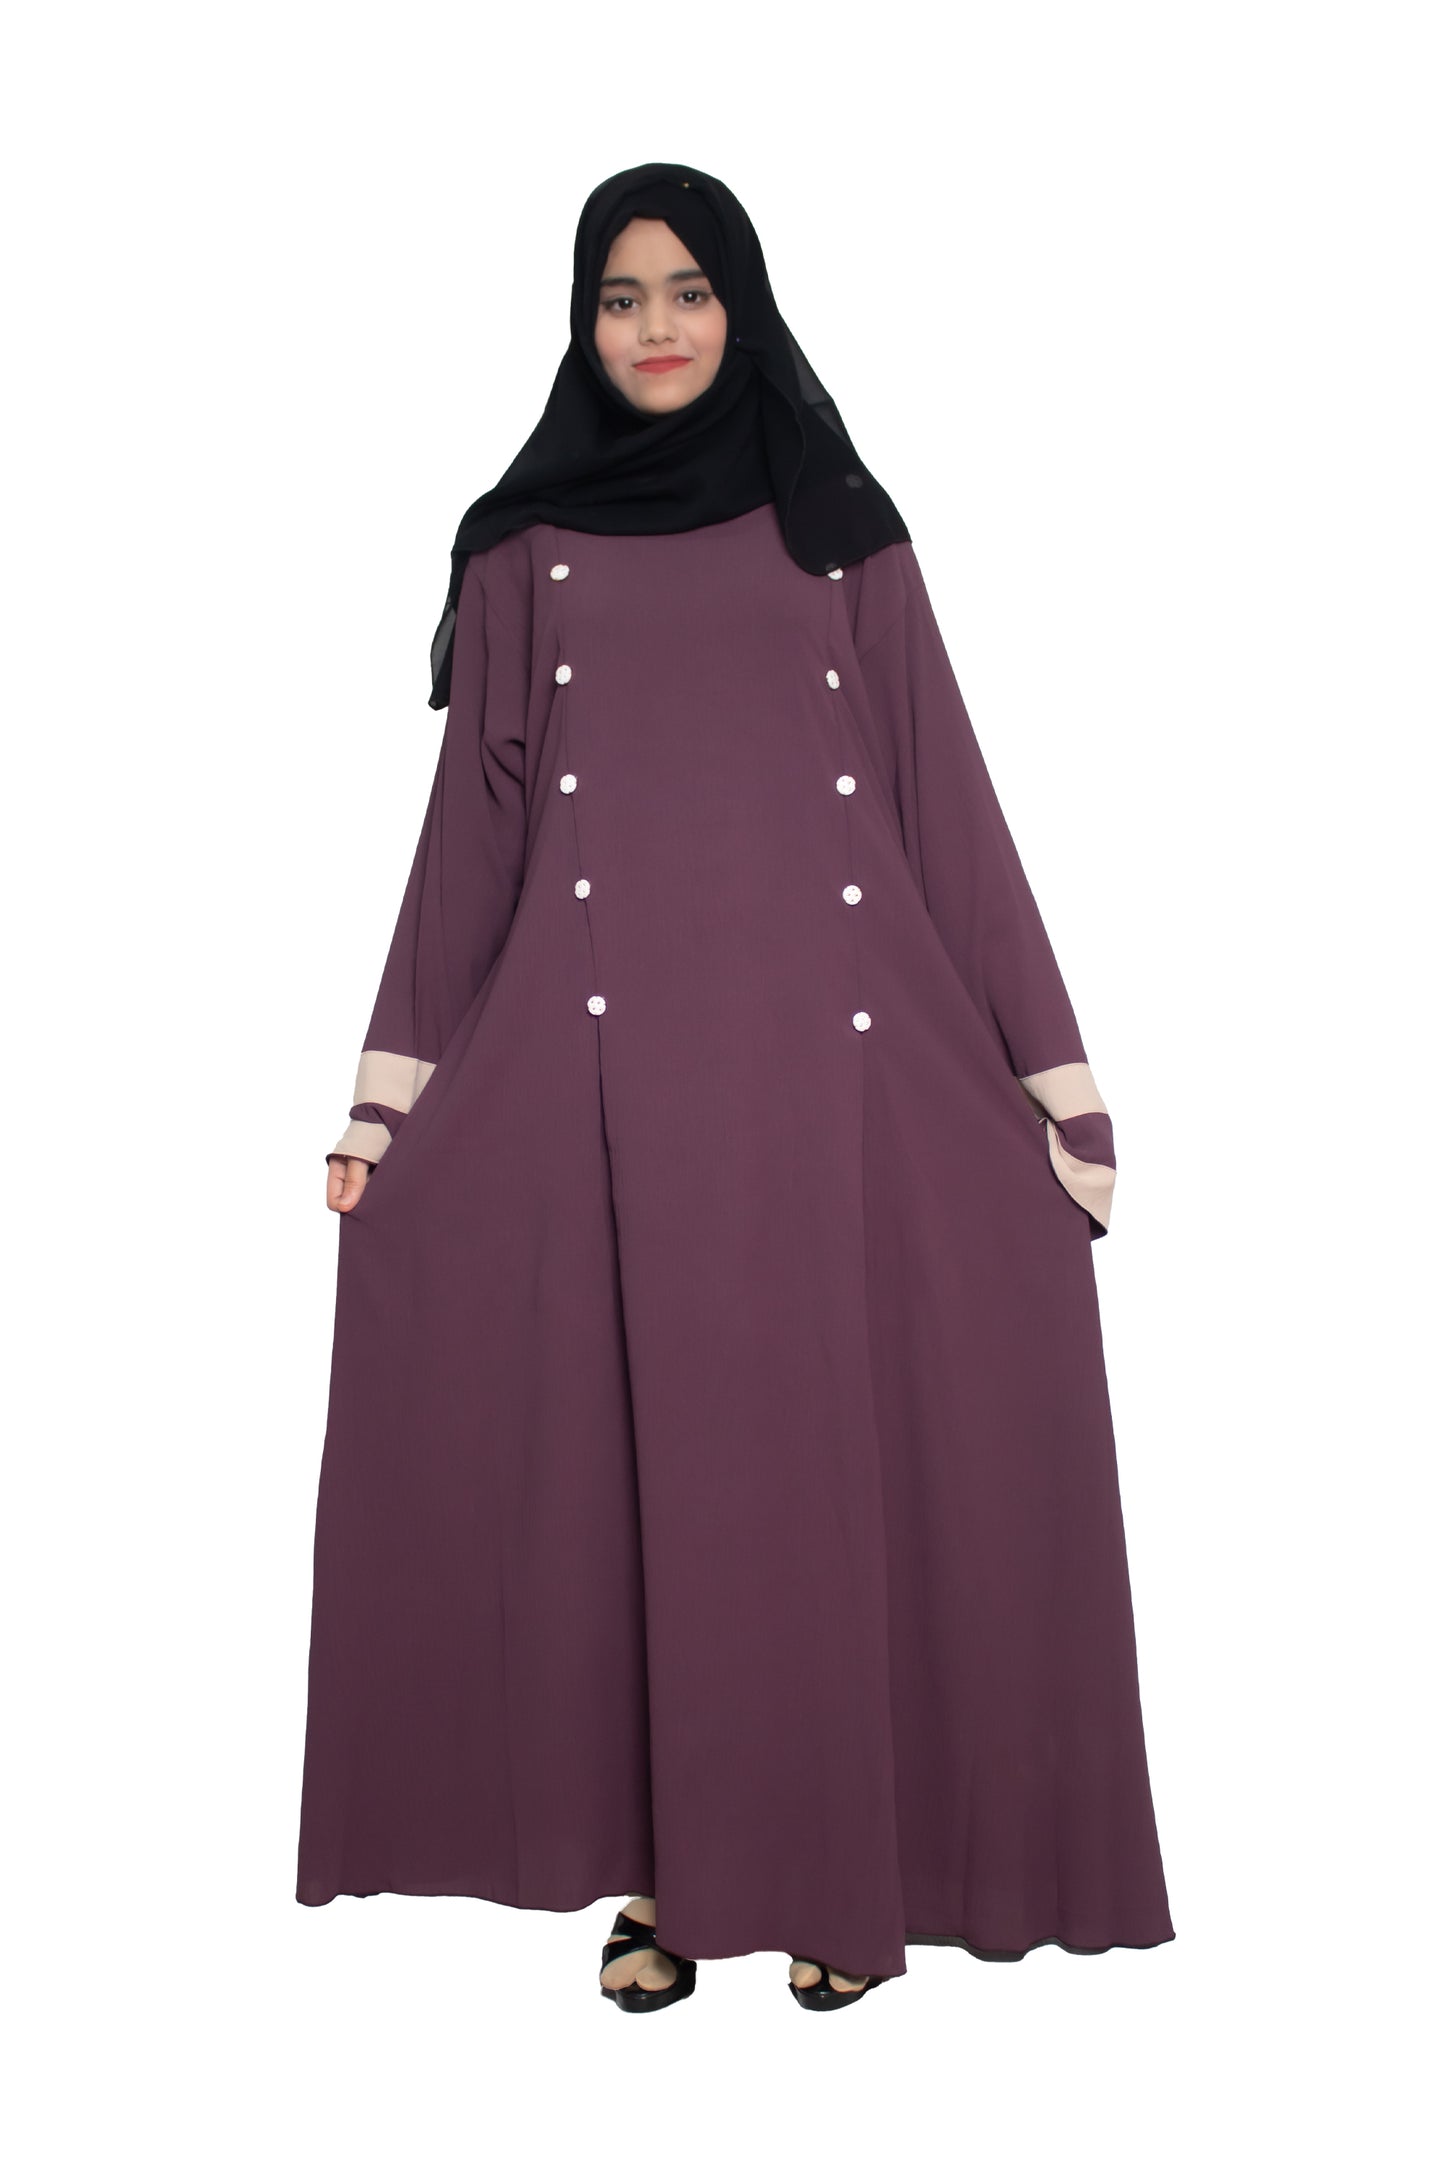 Modest City Self Design Plain Purple Front Button with Beige Cuff Abaya or Burqa With Hijab for Women & Girls-Series Laiba